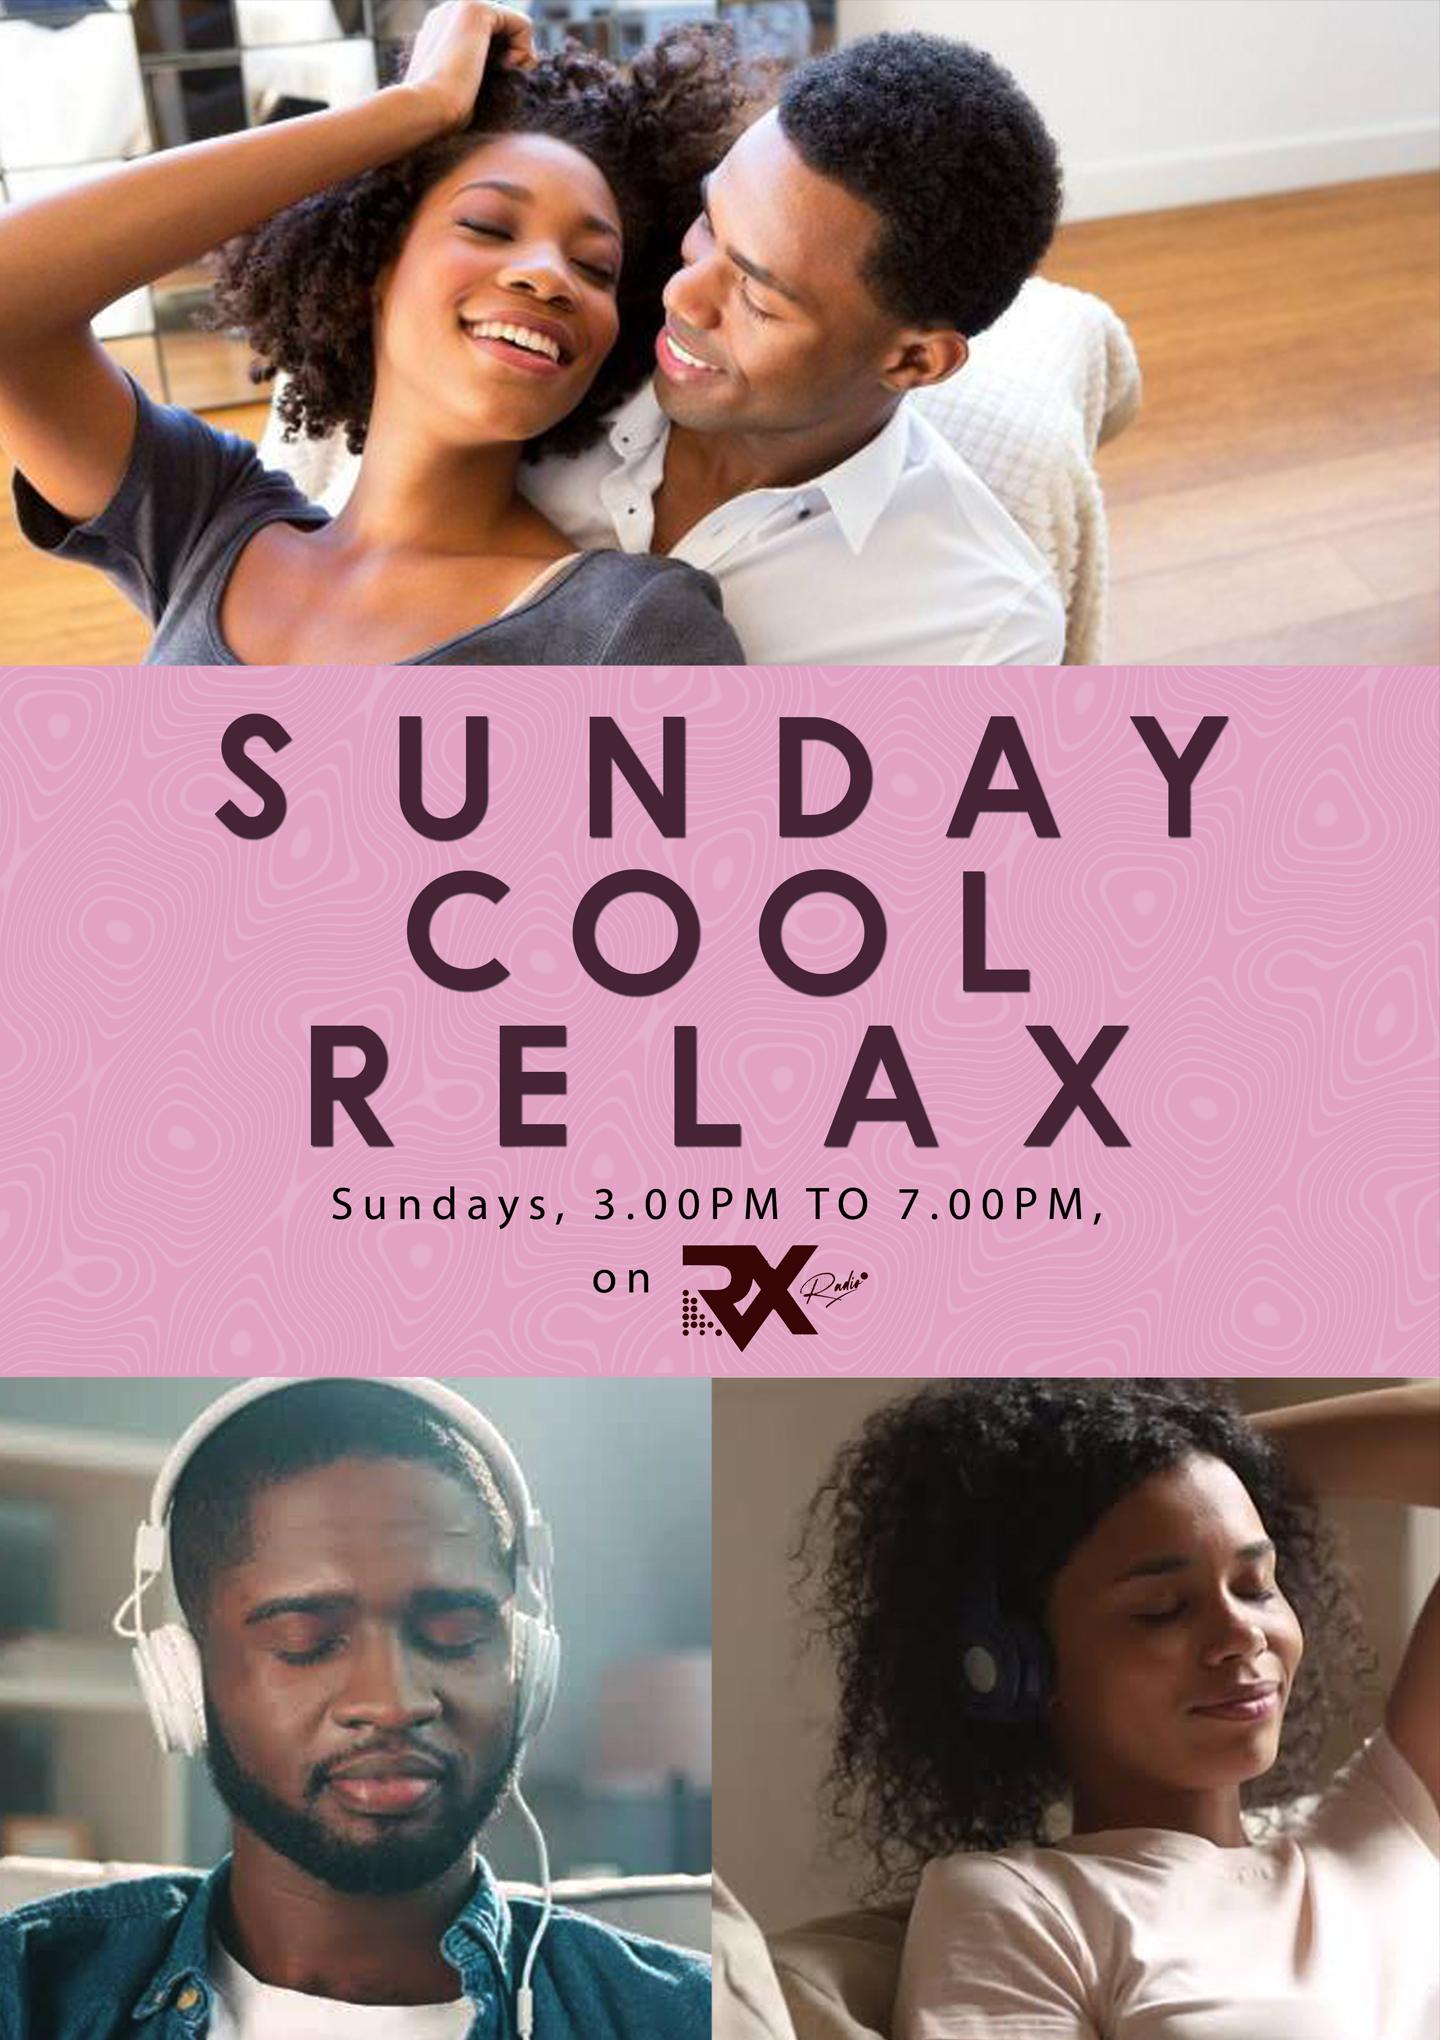 SUNDAY COOL RELAX with Sarah: Sunday (3.00pm - 7.00pm)